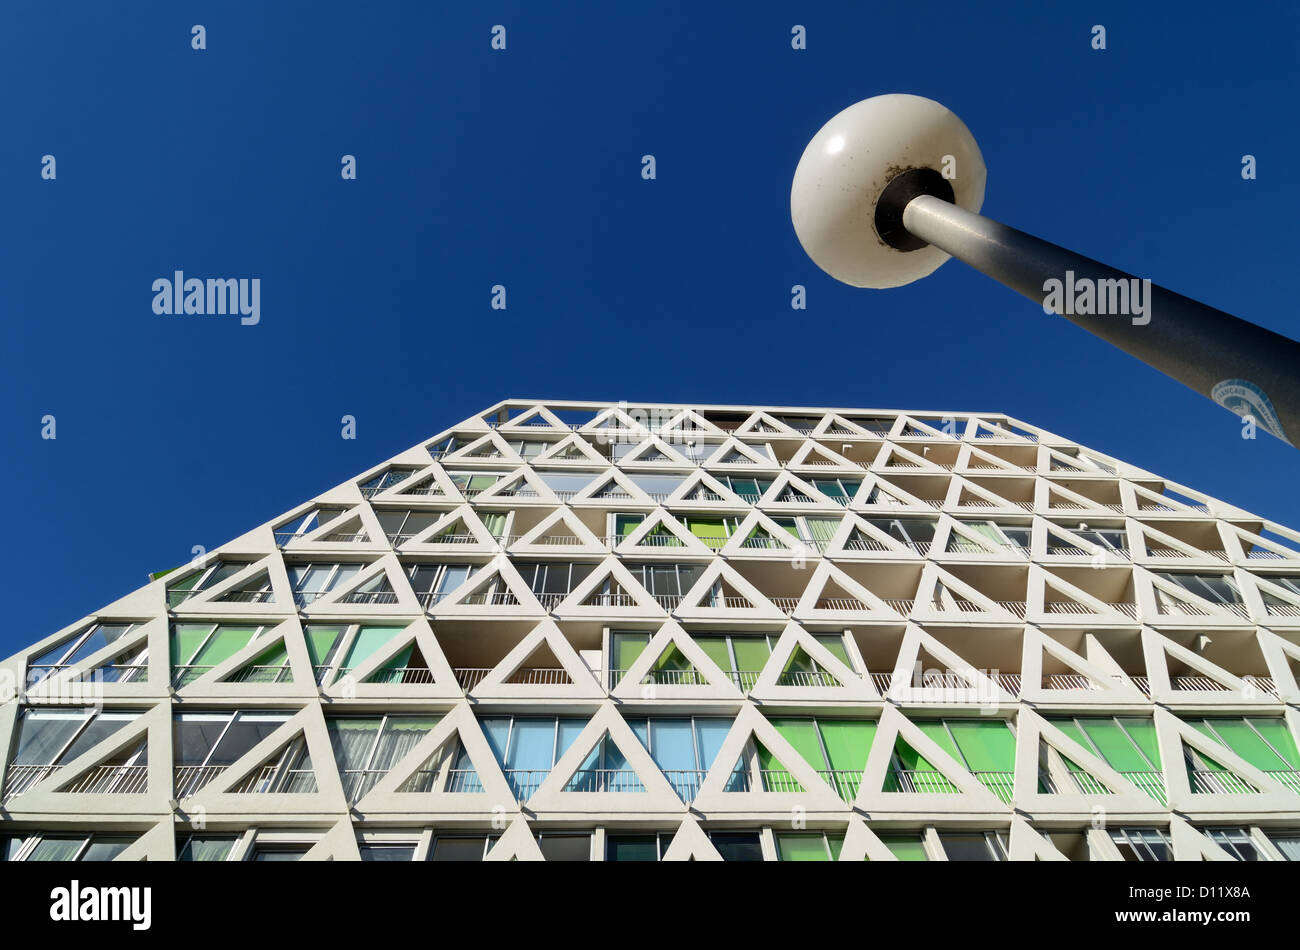 Triangular Window Patterns of Les Voiles Blanches Apartment Building & Modern Street Light La Grande-Motte Resort Town Hérault France Stock Photo